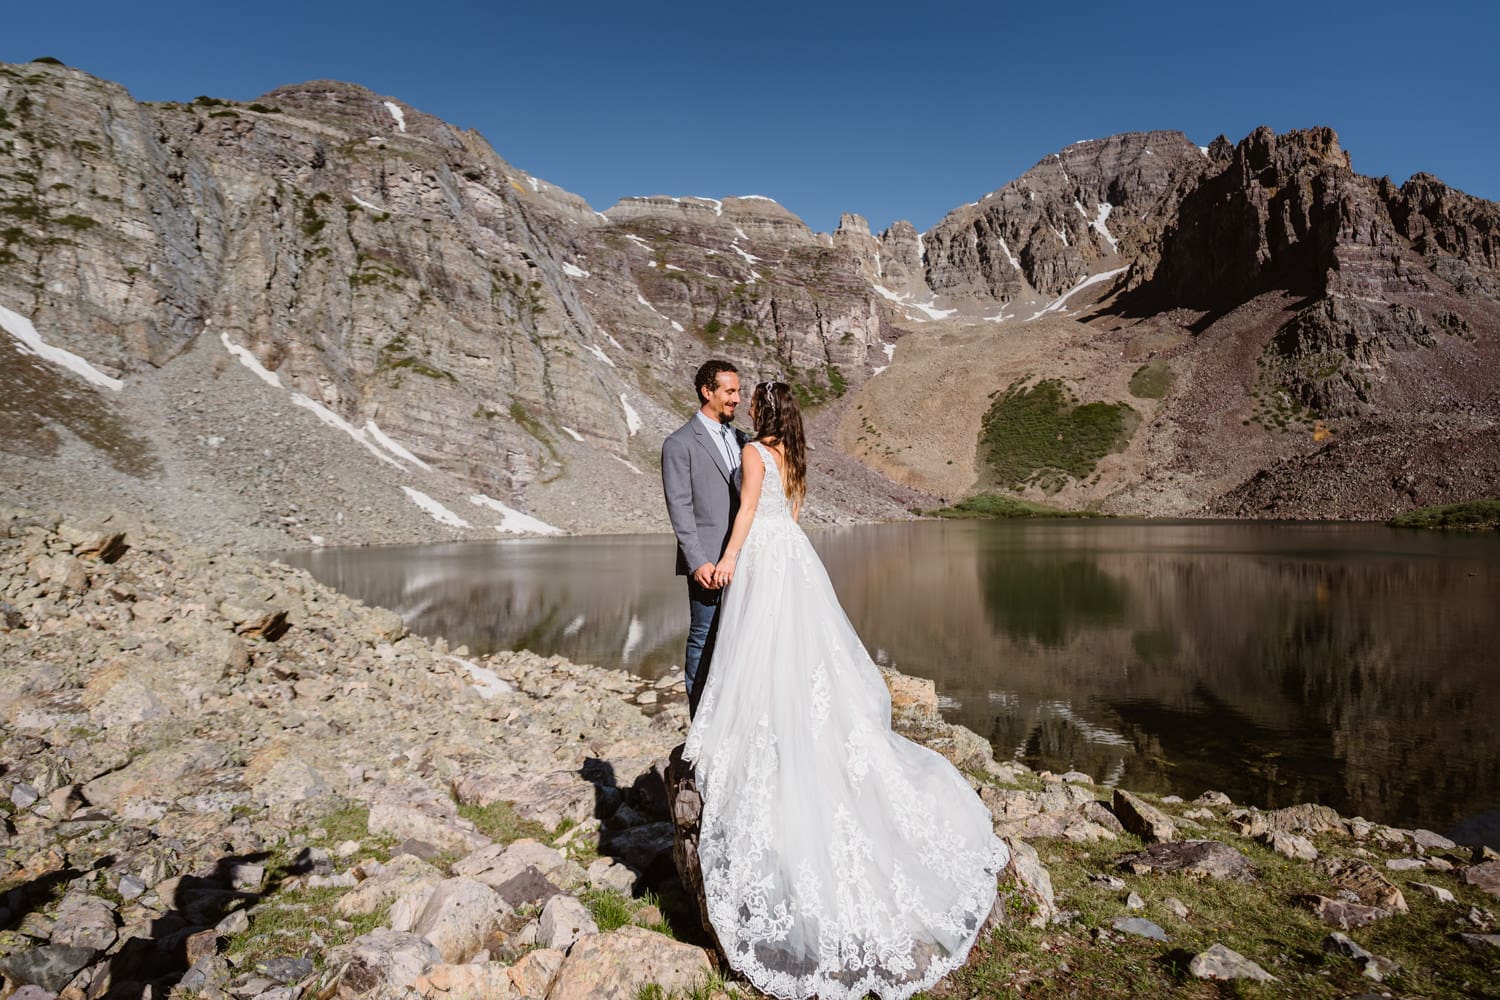 Couple standing on rock near a lake in Colorado on their elopement day.